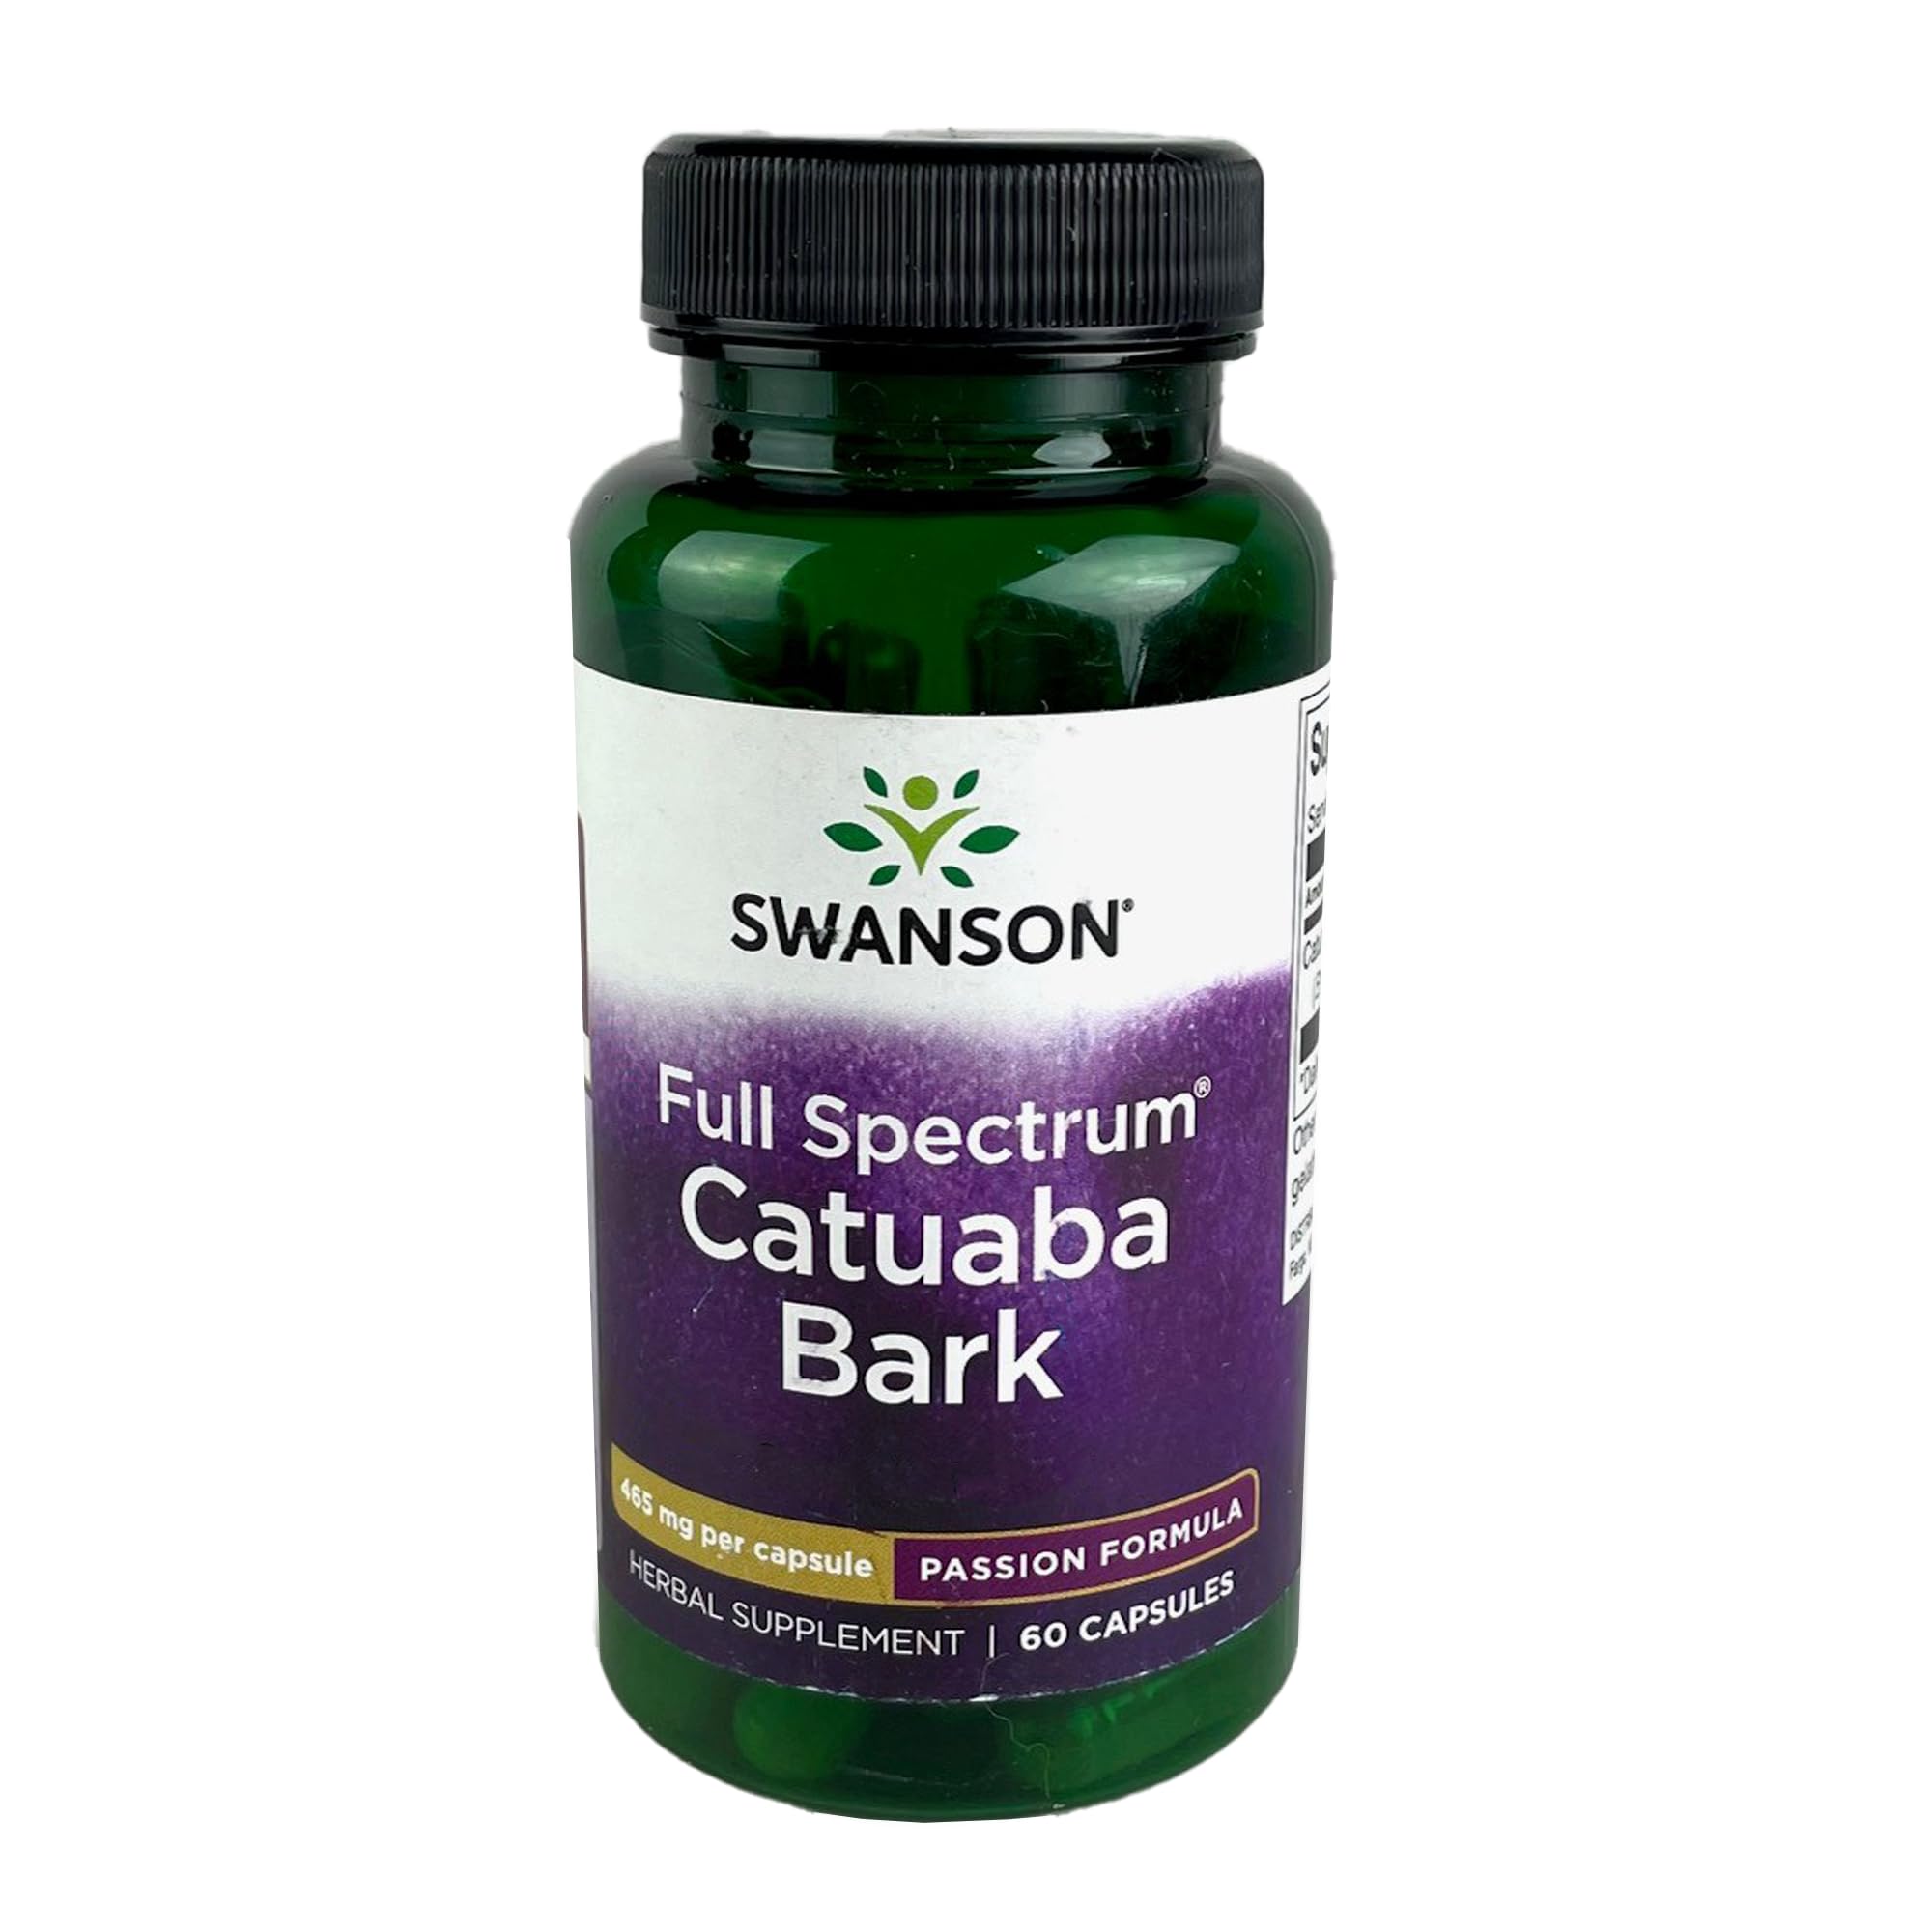 Book Cover Swanson Catuaba Bark - Supports Endurance & Stamina for Men & Women - Herbal Supplement Promoting Natural Health & Wellness - (60 Capsules, 465mg Each)